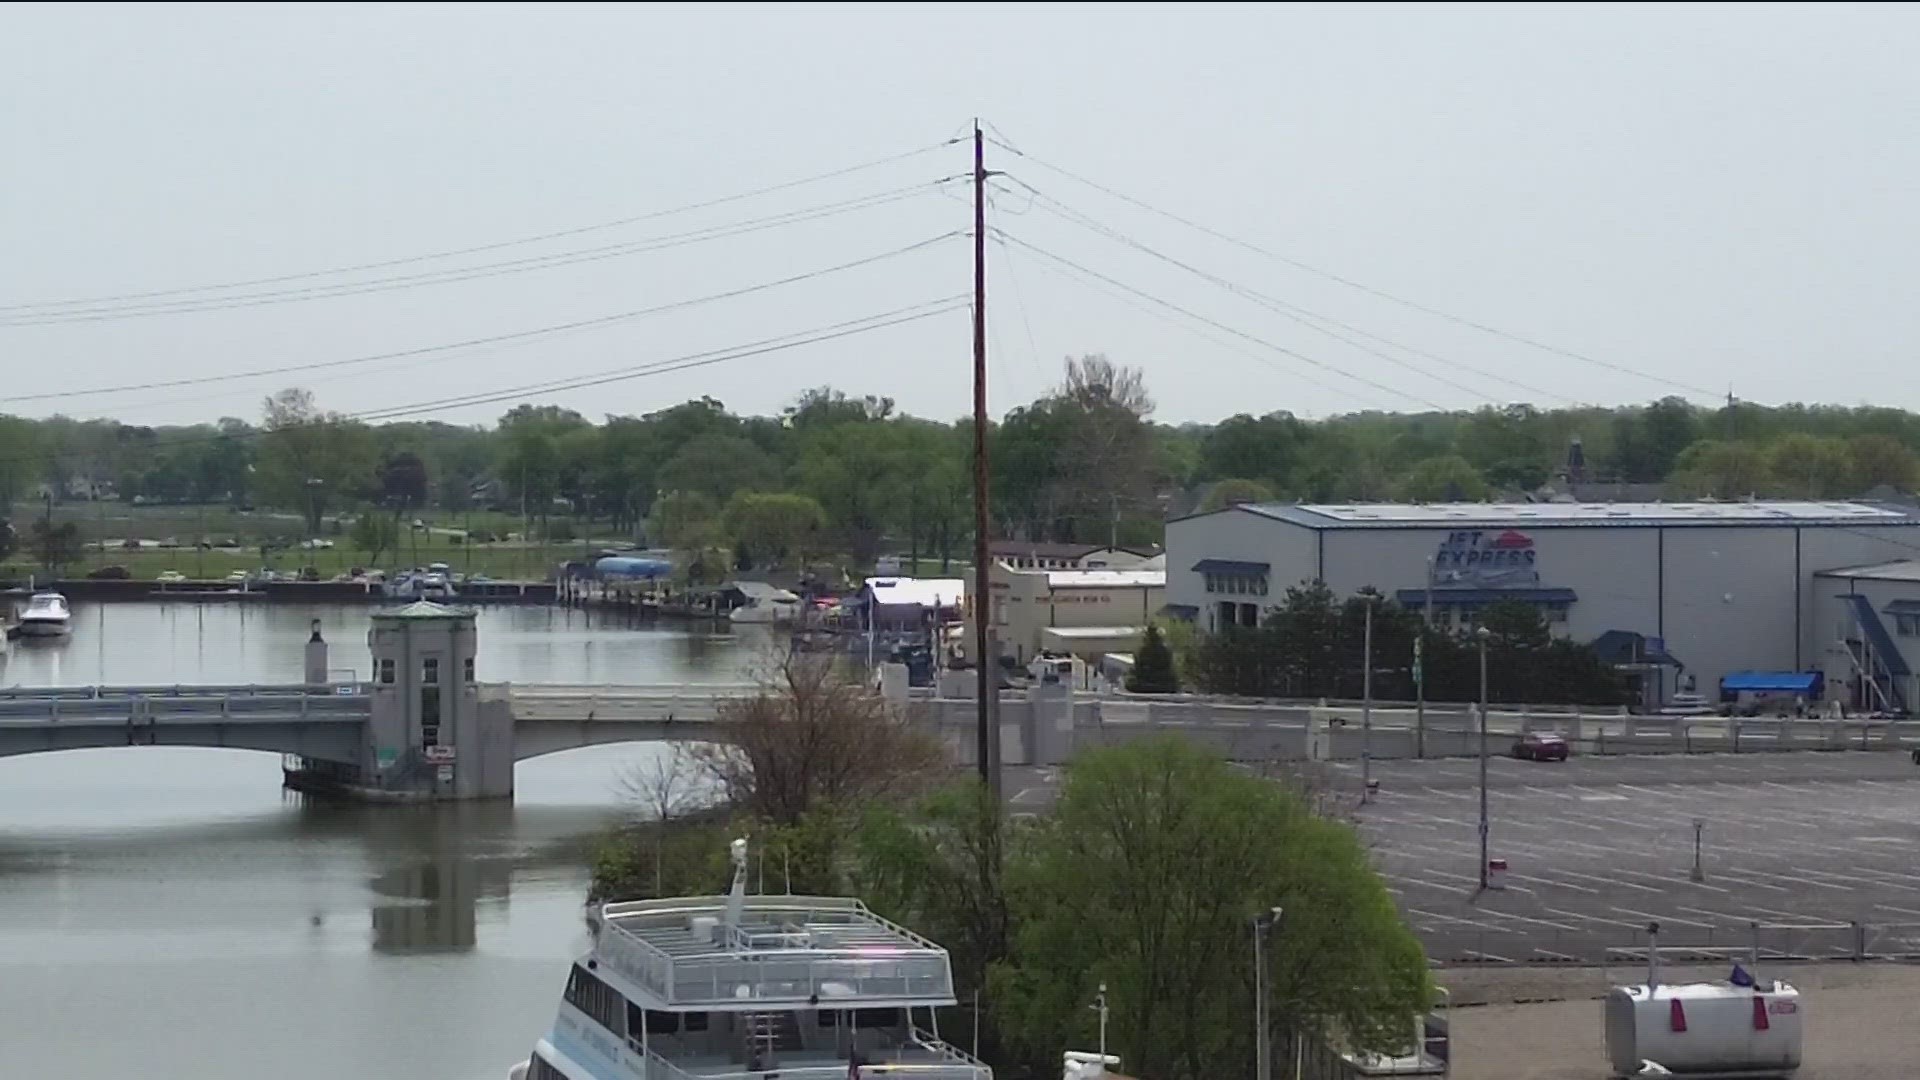 Low-hanging cables at a Port Clinton marina are preventing boats from going out to sea. One business owner said the obstacle is cutting into his income.